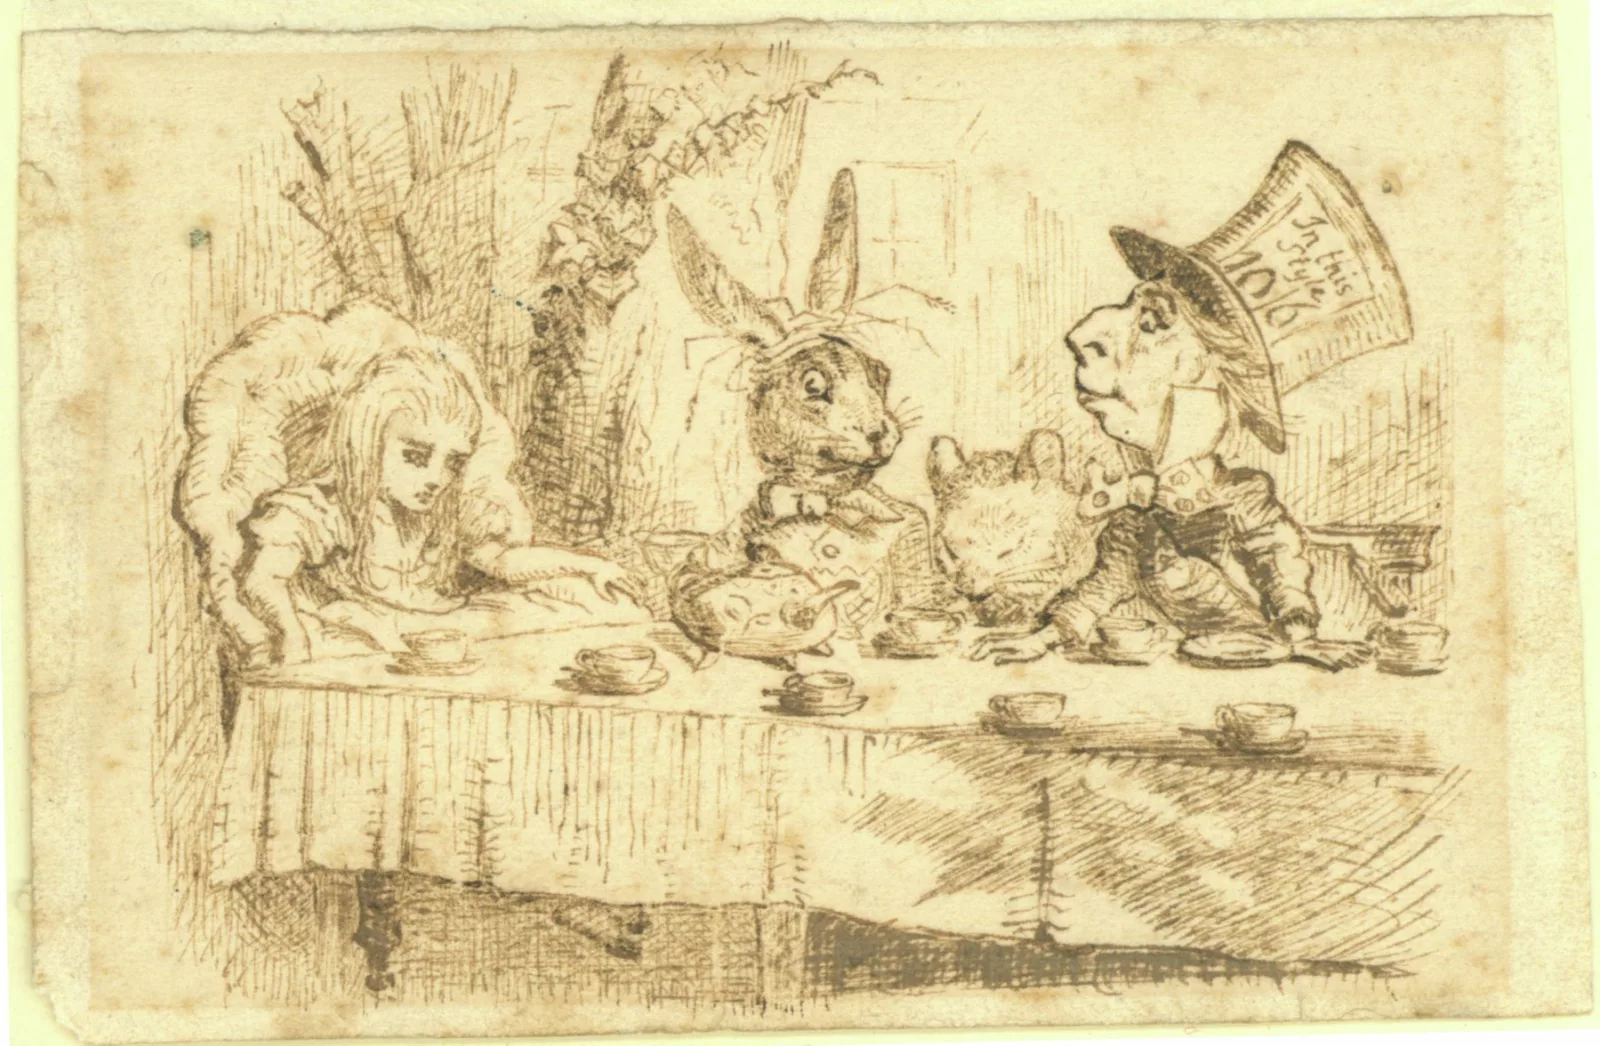 Original illustration by John Tenniel for Alice’s Adventures in Wonderland, by Lewis Carroll, first edition 1865.